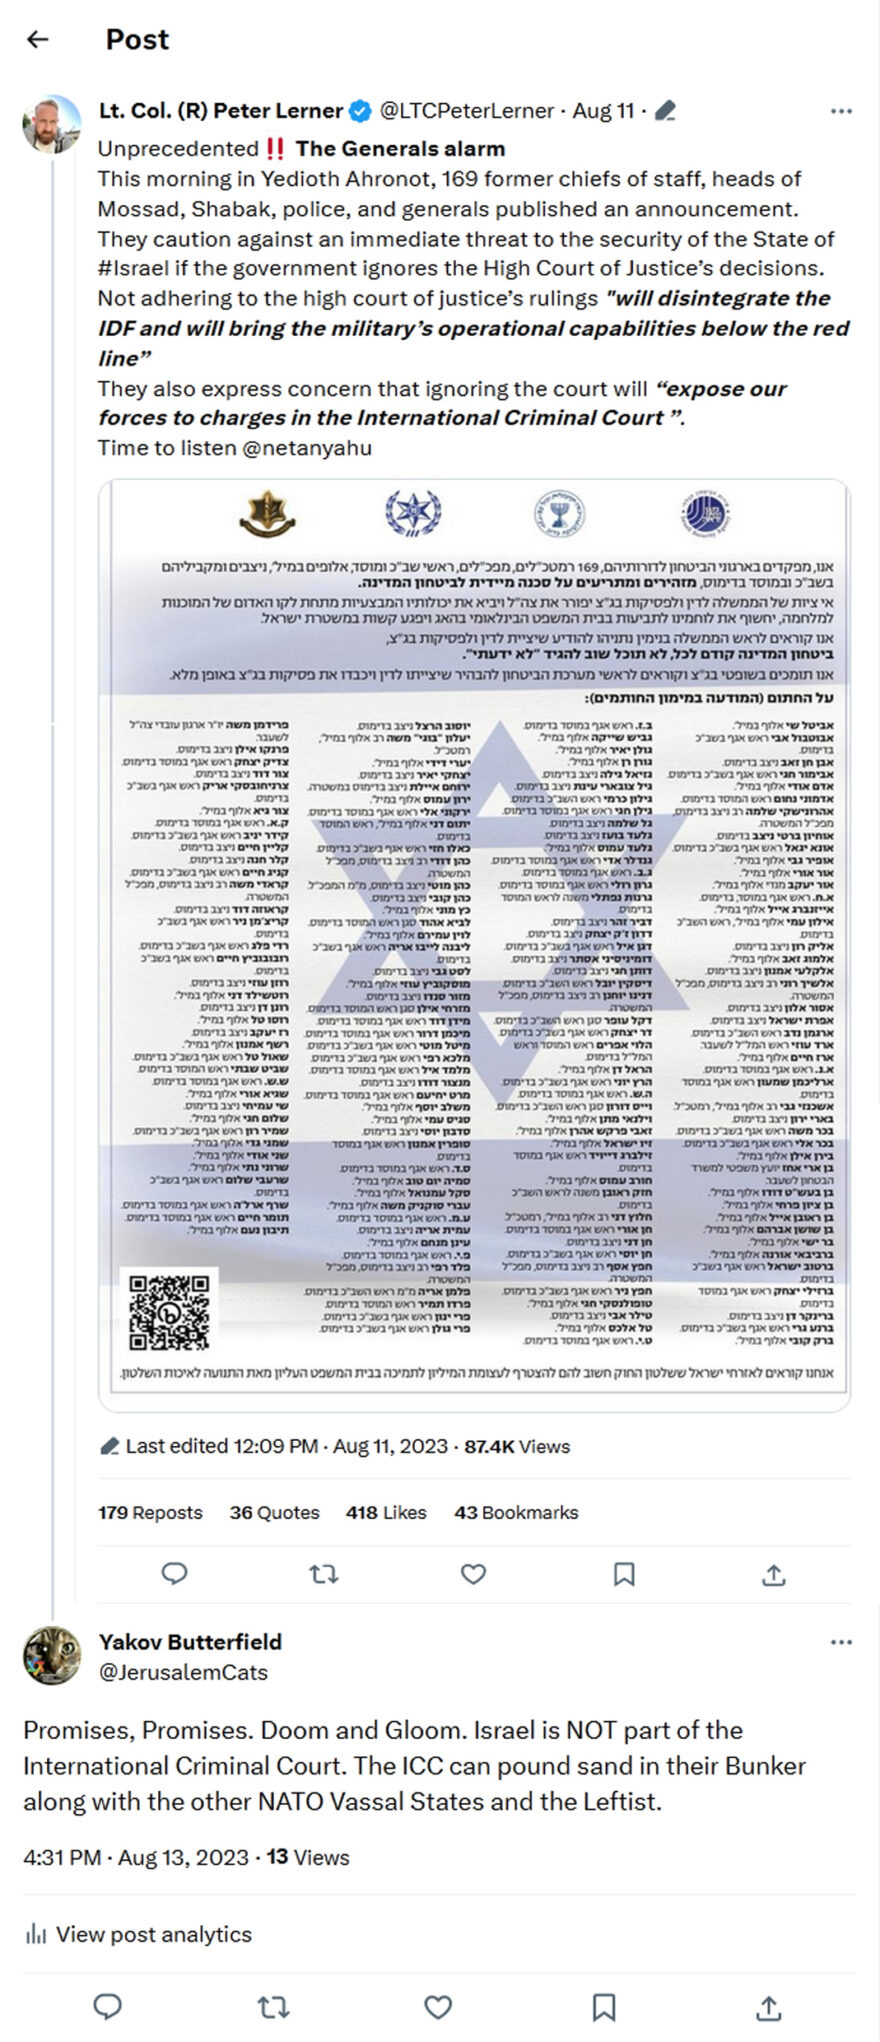 Lt. Col. (R) Peter Lerner-tweet-11August2023-This morning in Yedioth Ahronot